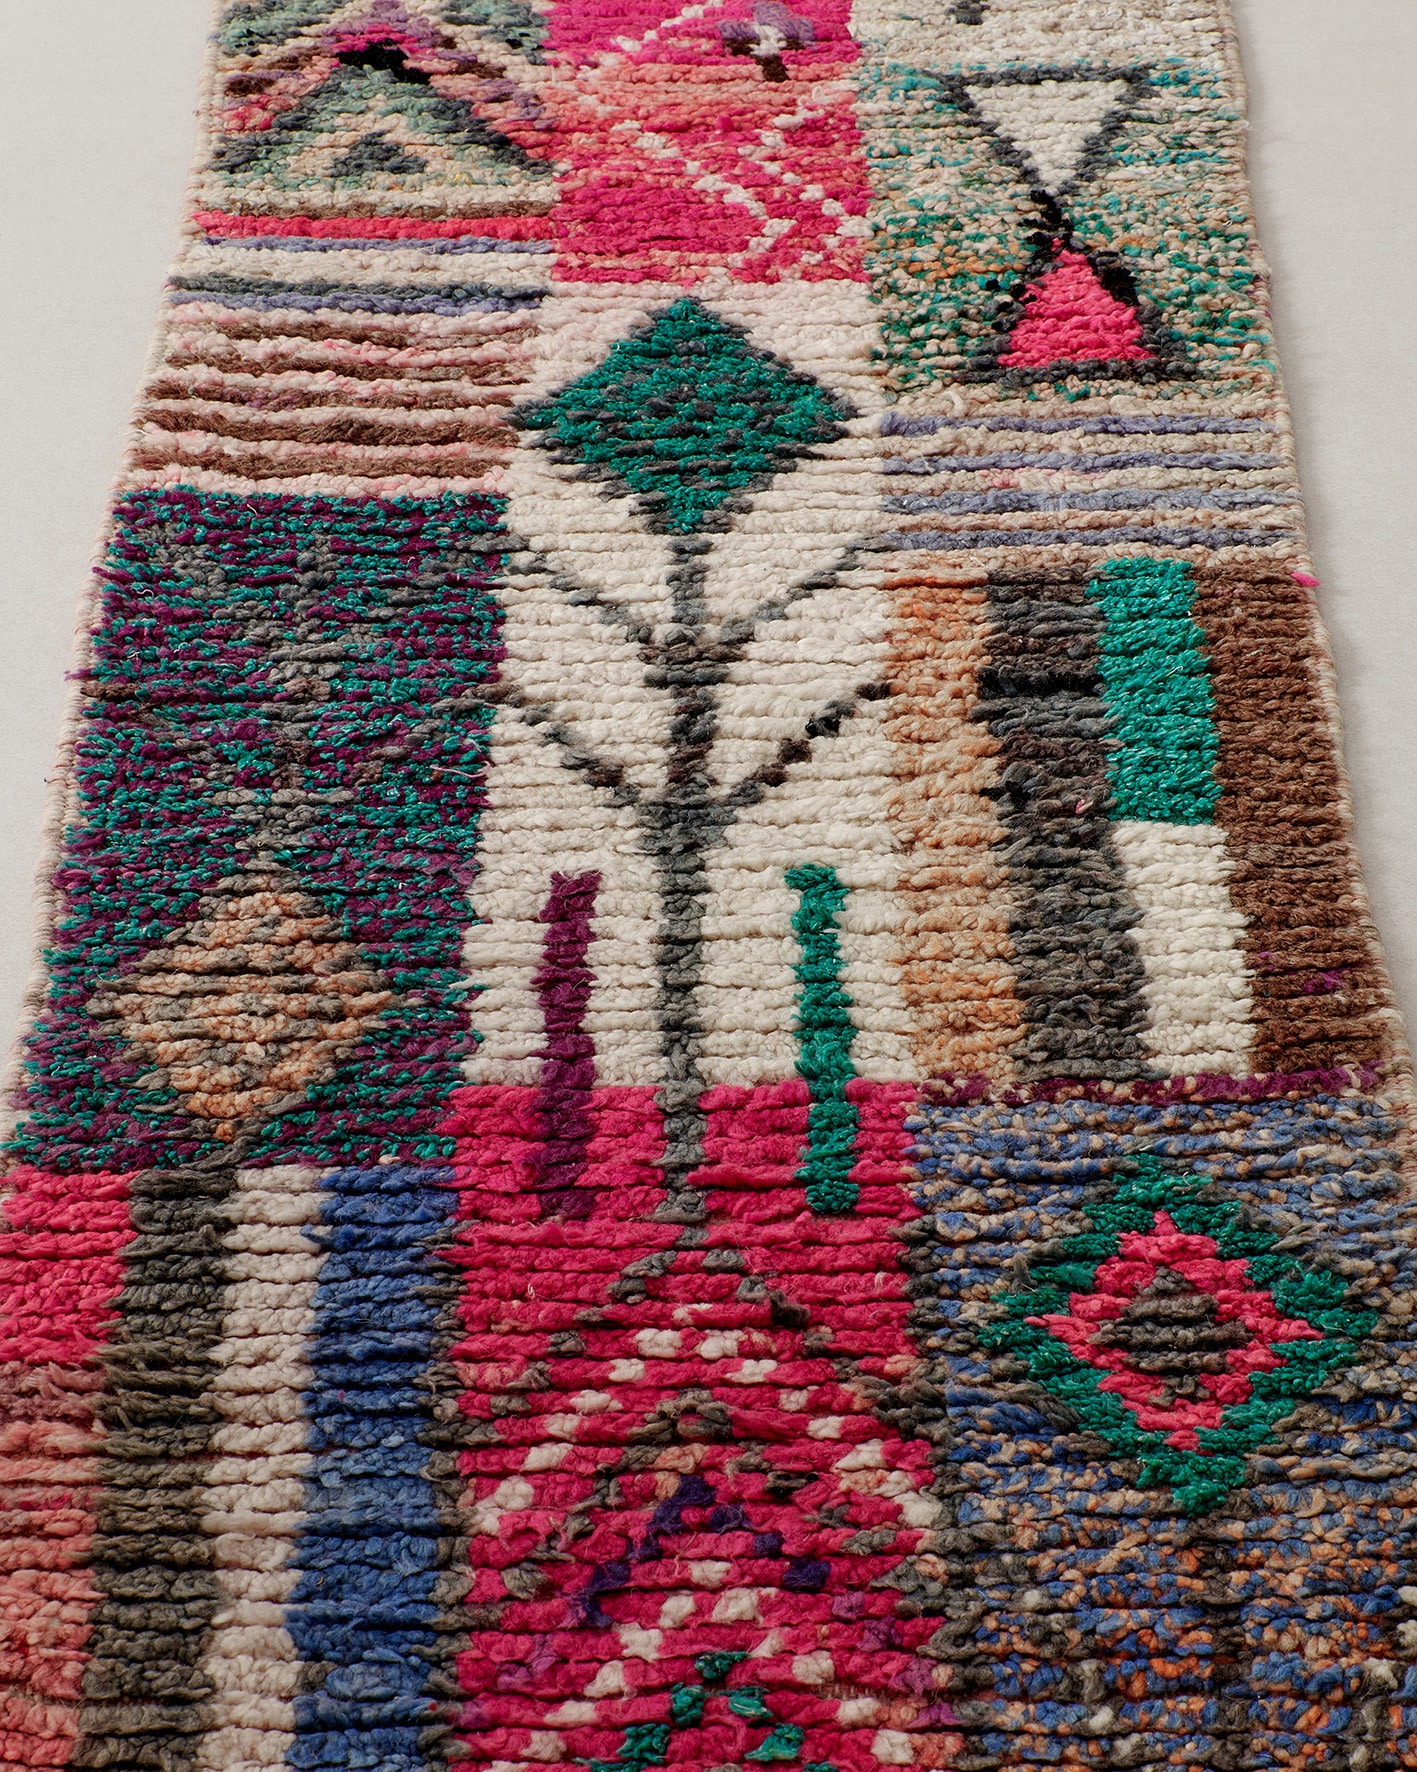 Boujaad runner with flowers, close